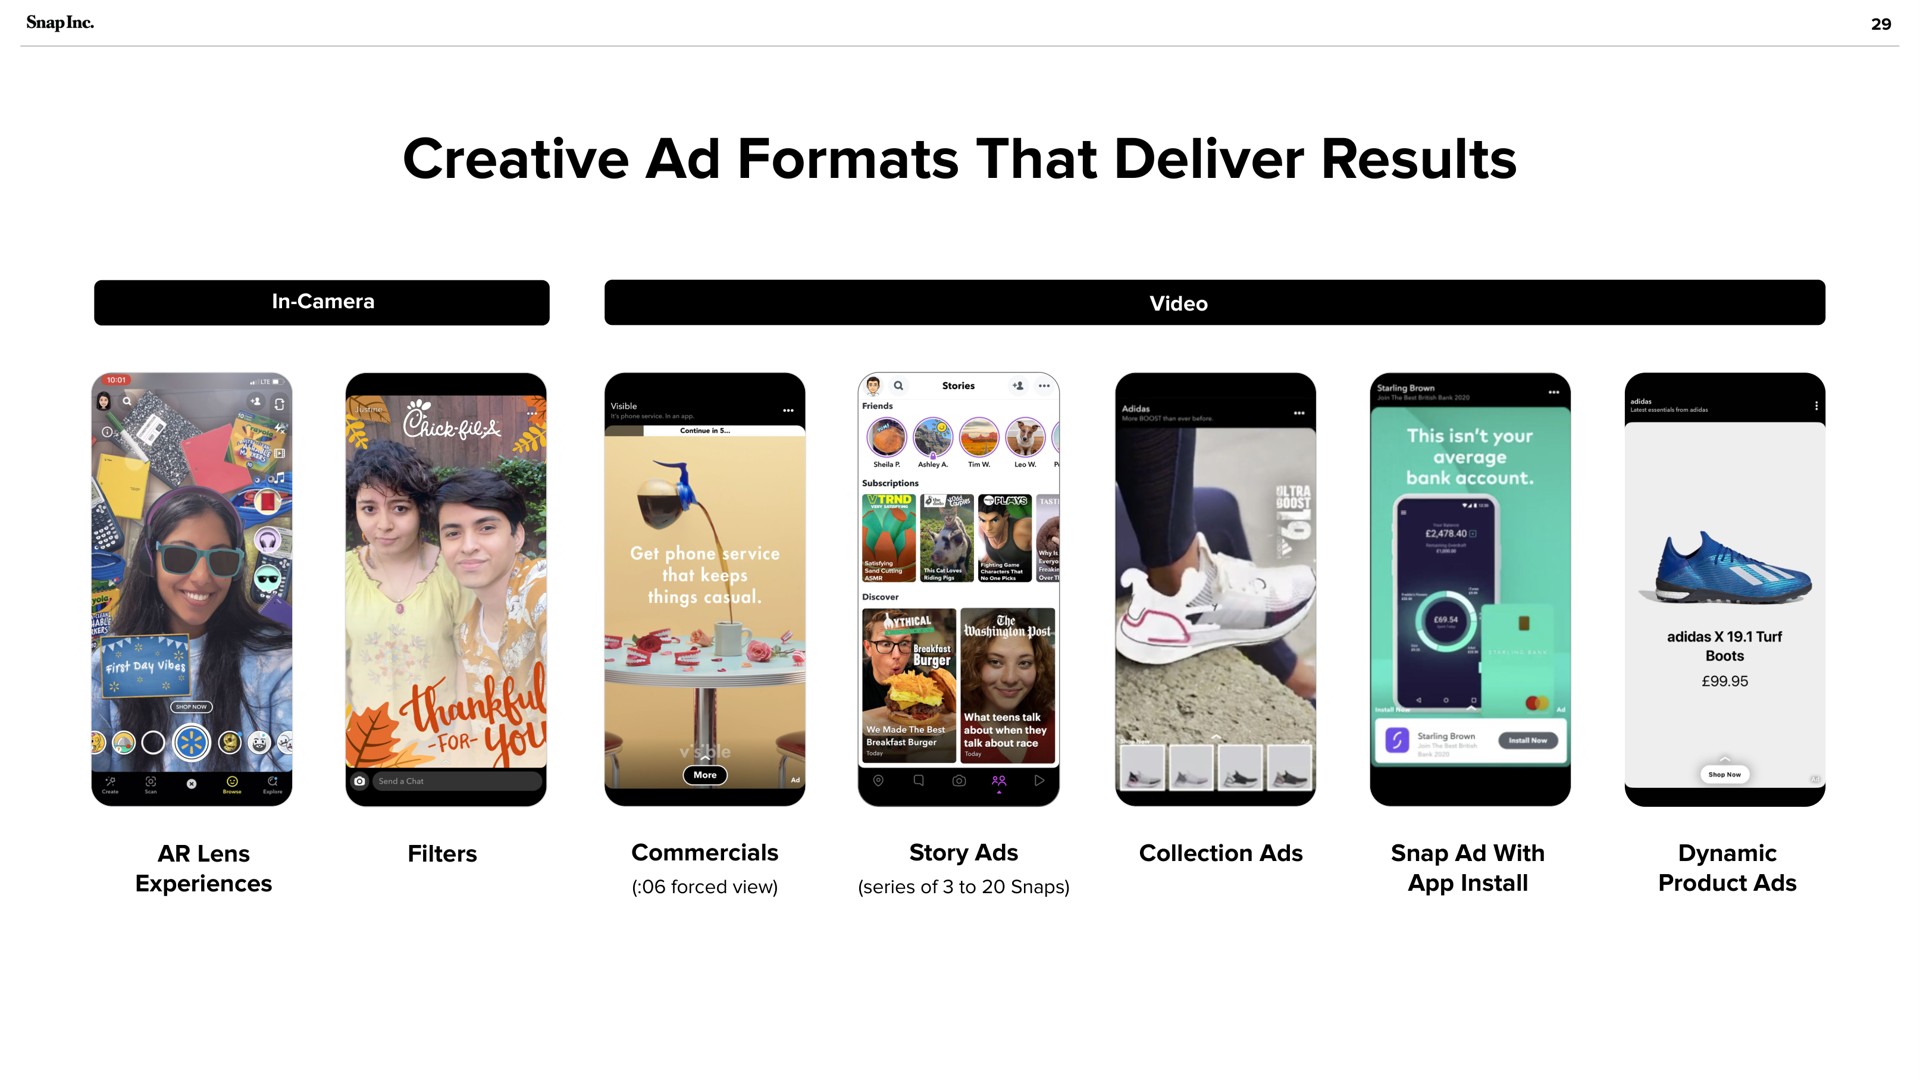 creative formats that deliver results | Snap Inc